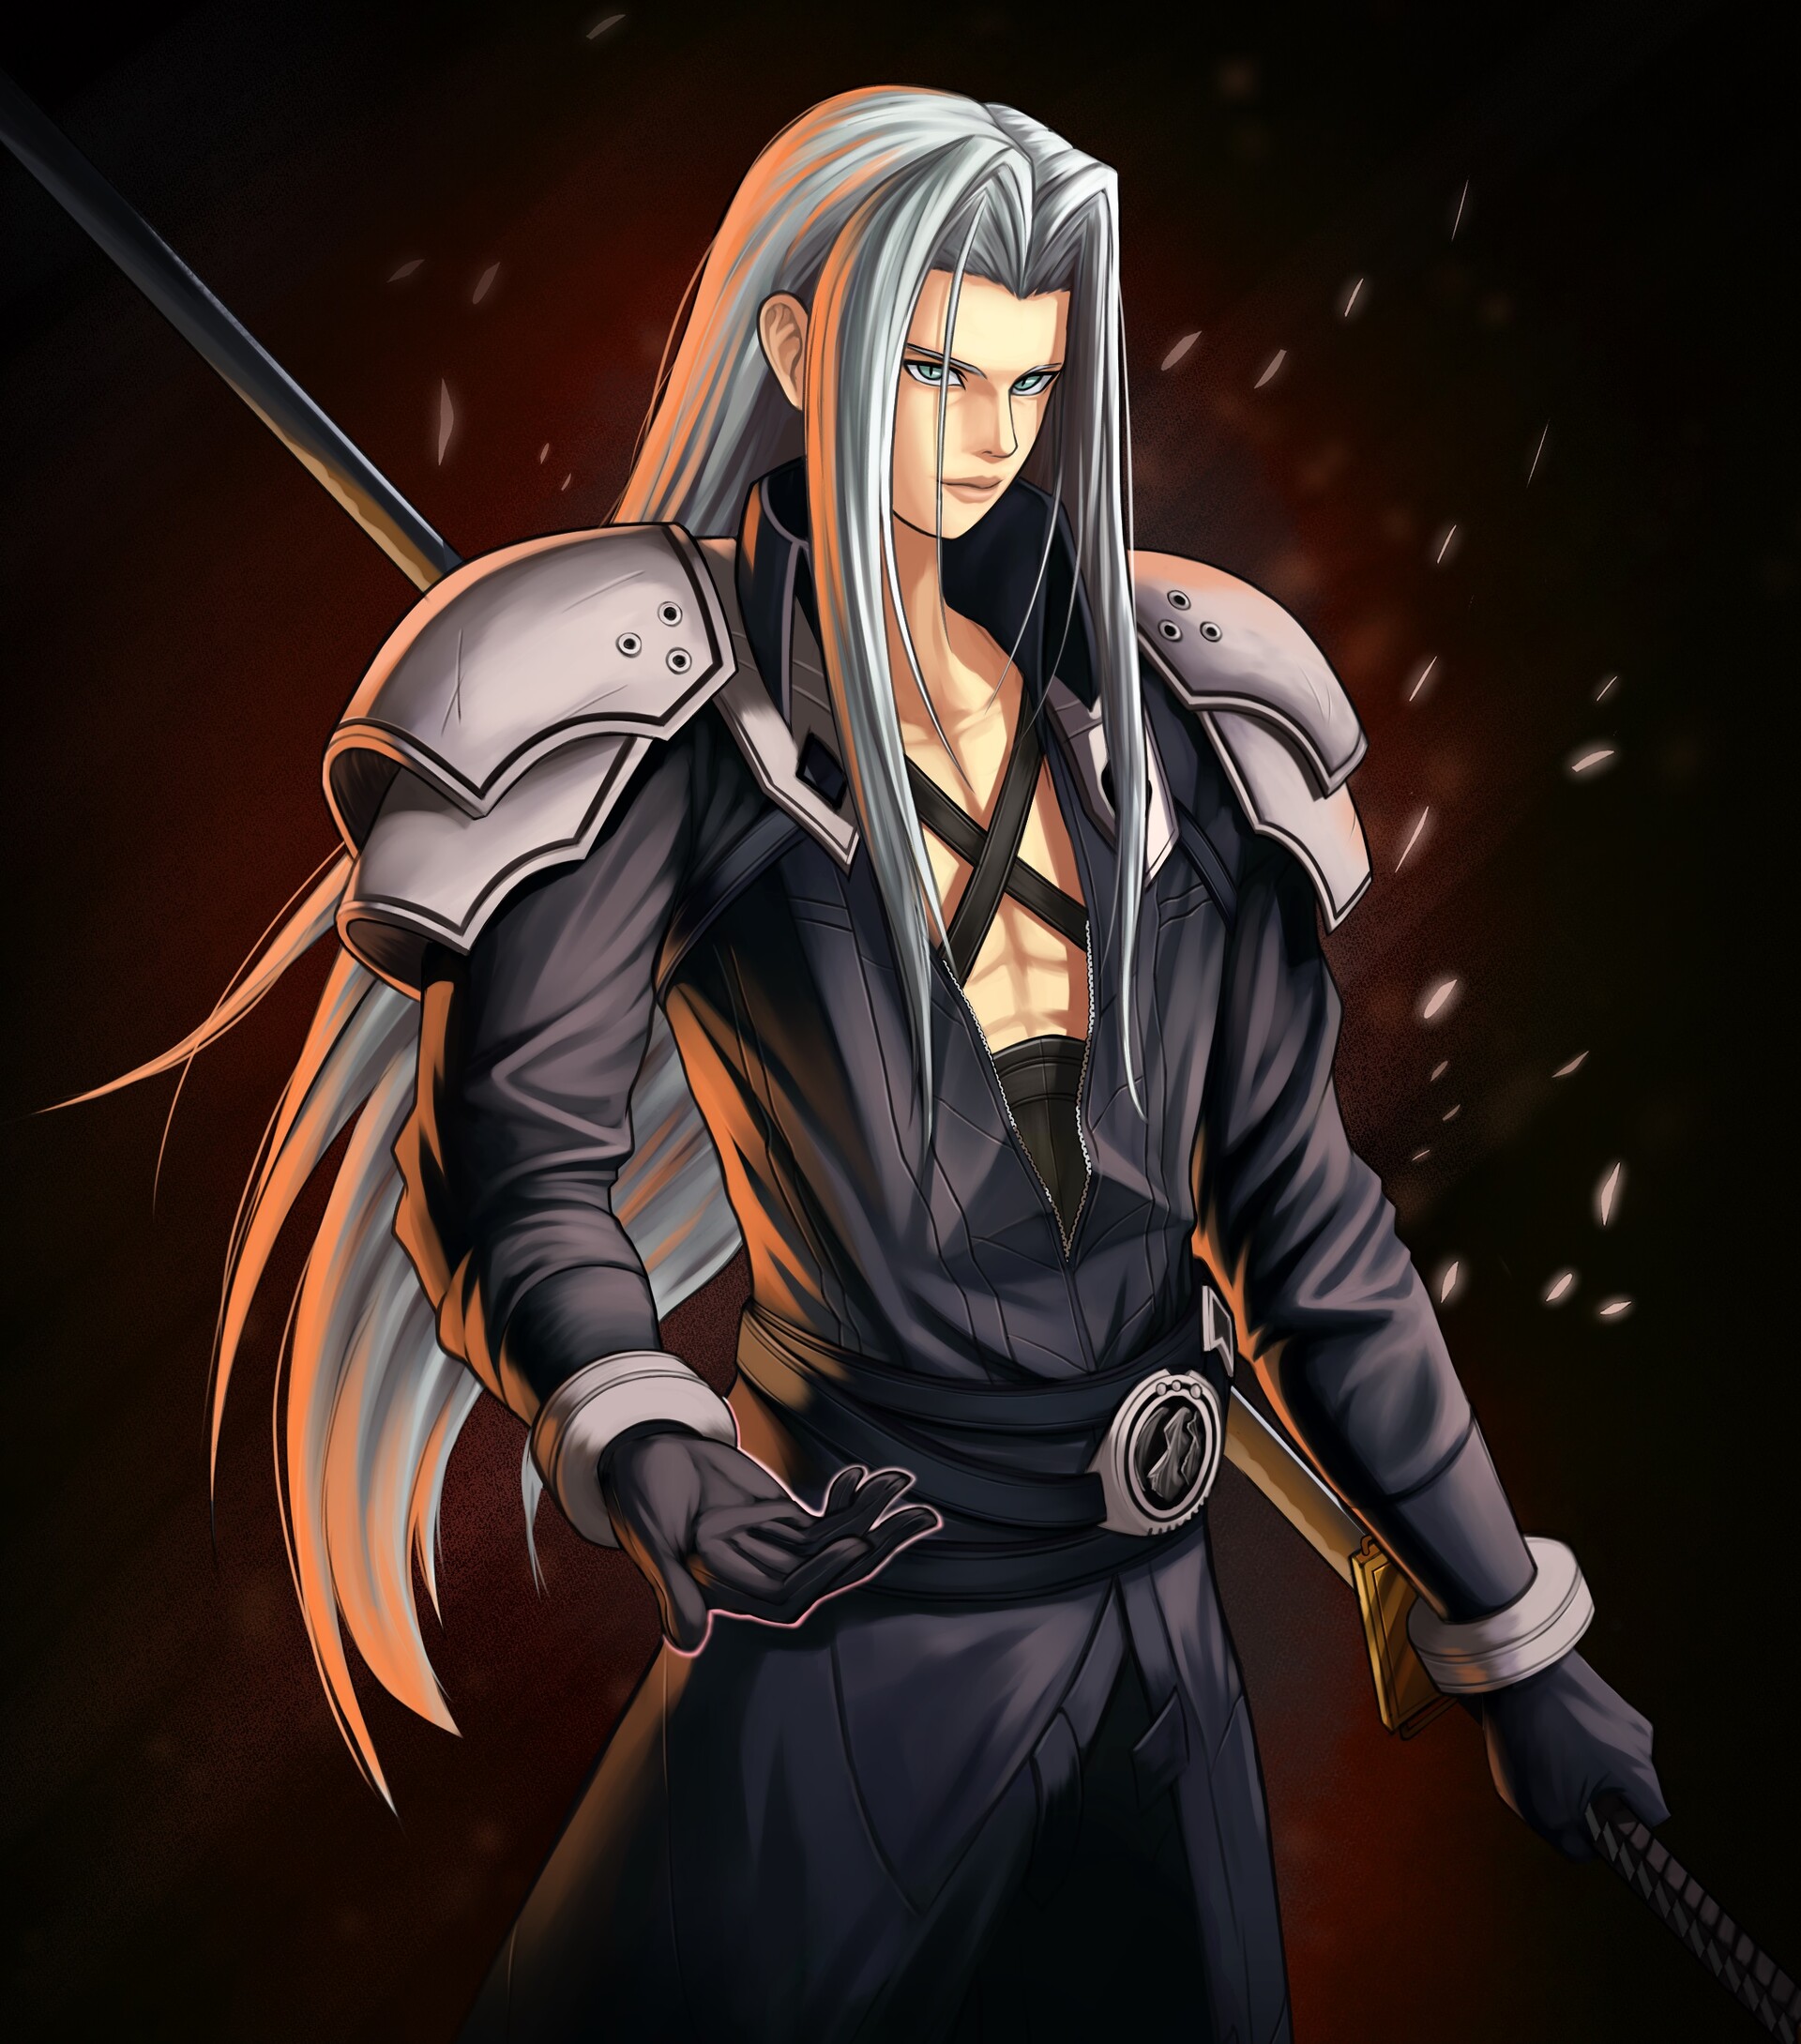 How To Draw Anime Sephiroth, Step by Step, Drawing Guide, by Dawn - DragoArt